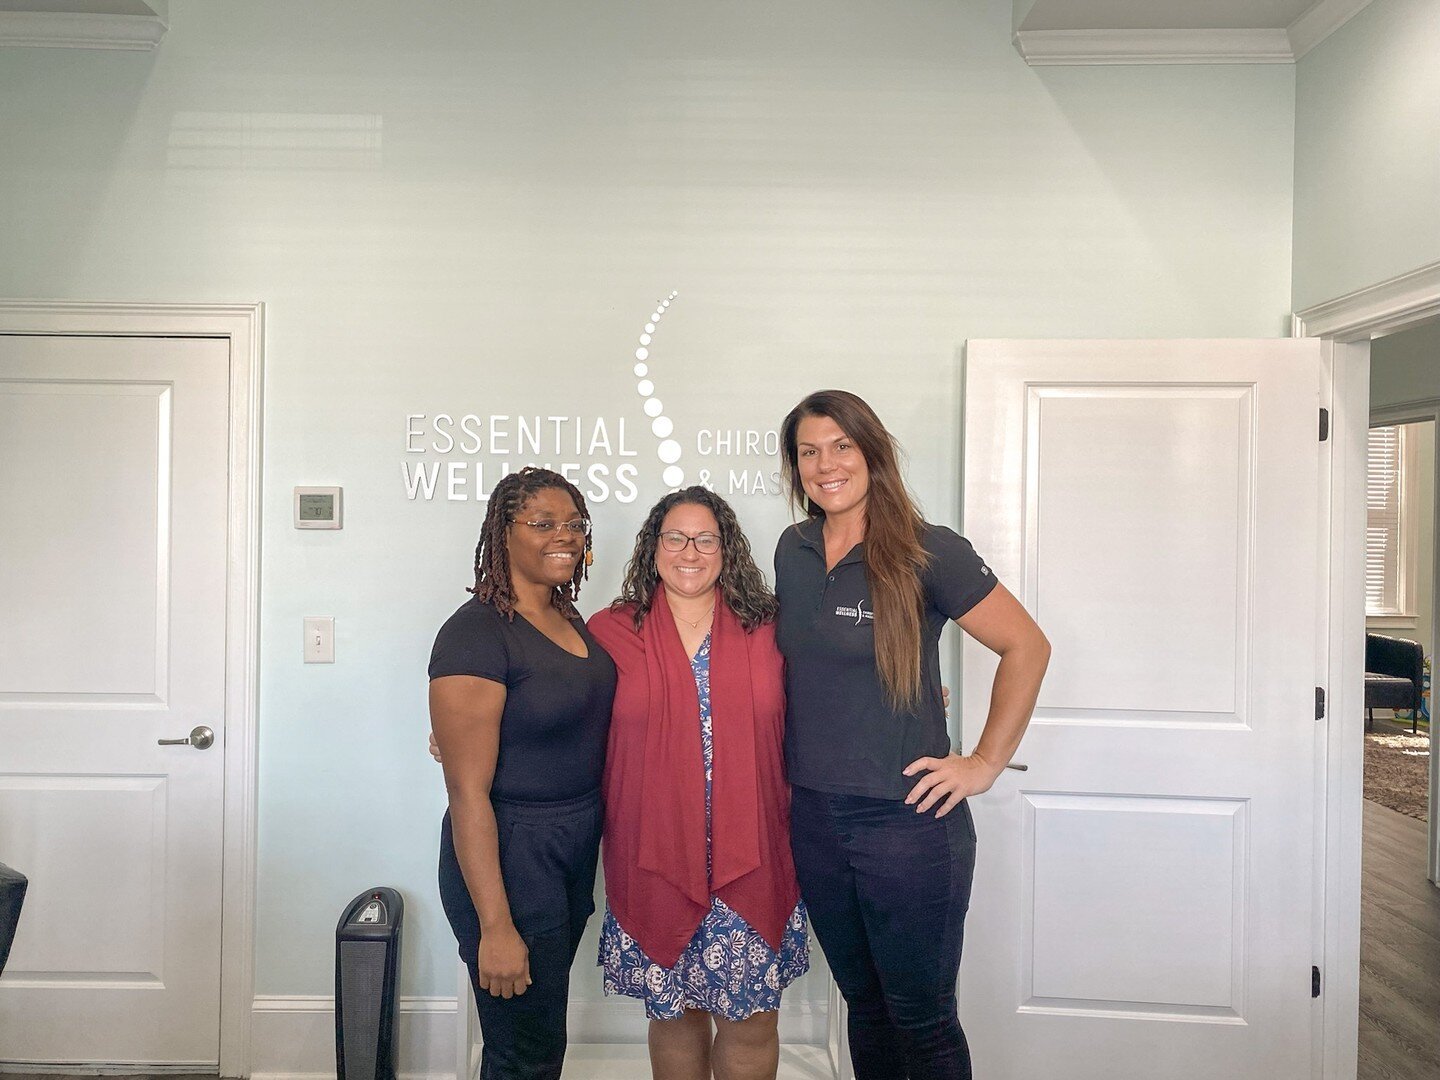 Feeling all the weekend vibes already? 💃🏼💙

Our Friday team is sending you all the good vibes for a weekend full of relaxation, fun, and a touch of Essential Wellness magic! Come see us today and tomorrow!